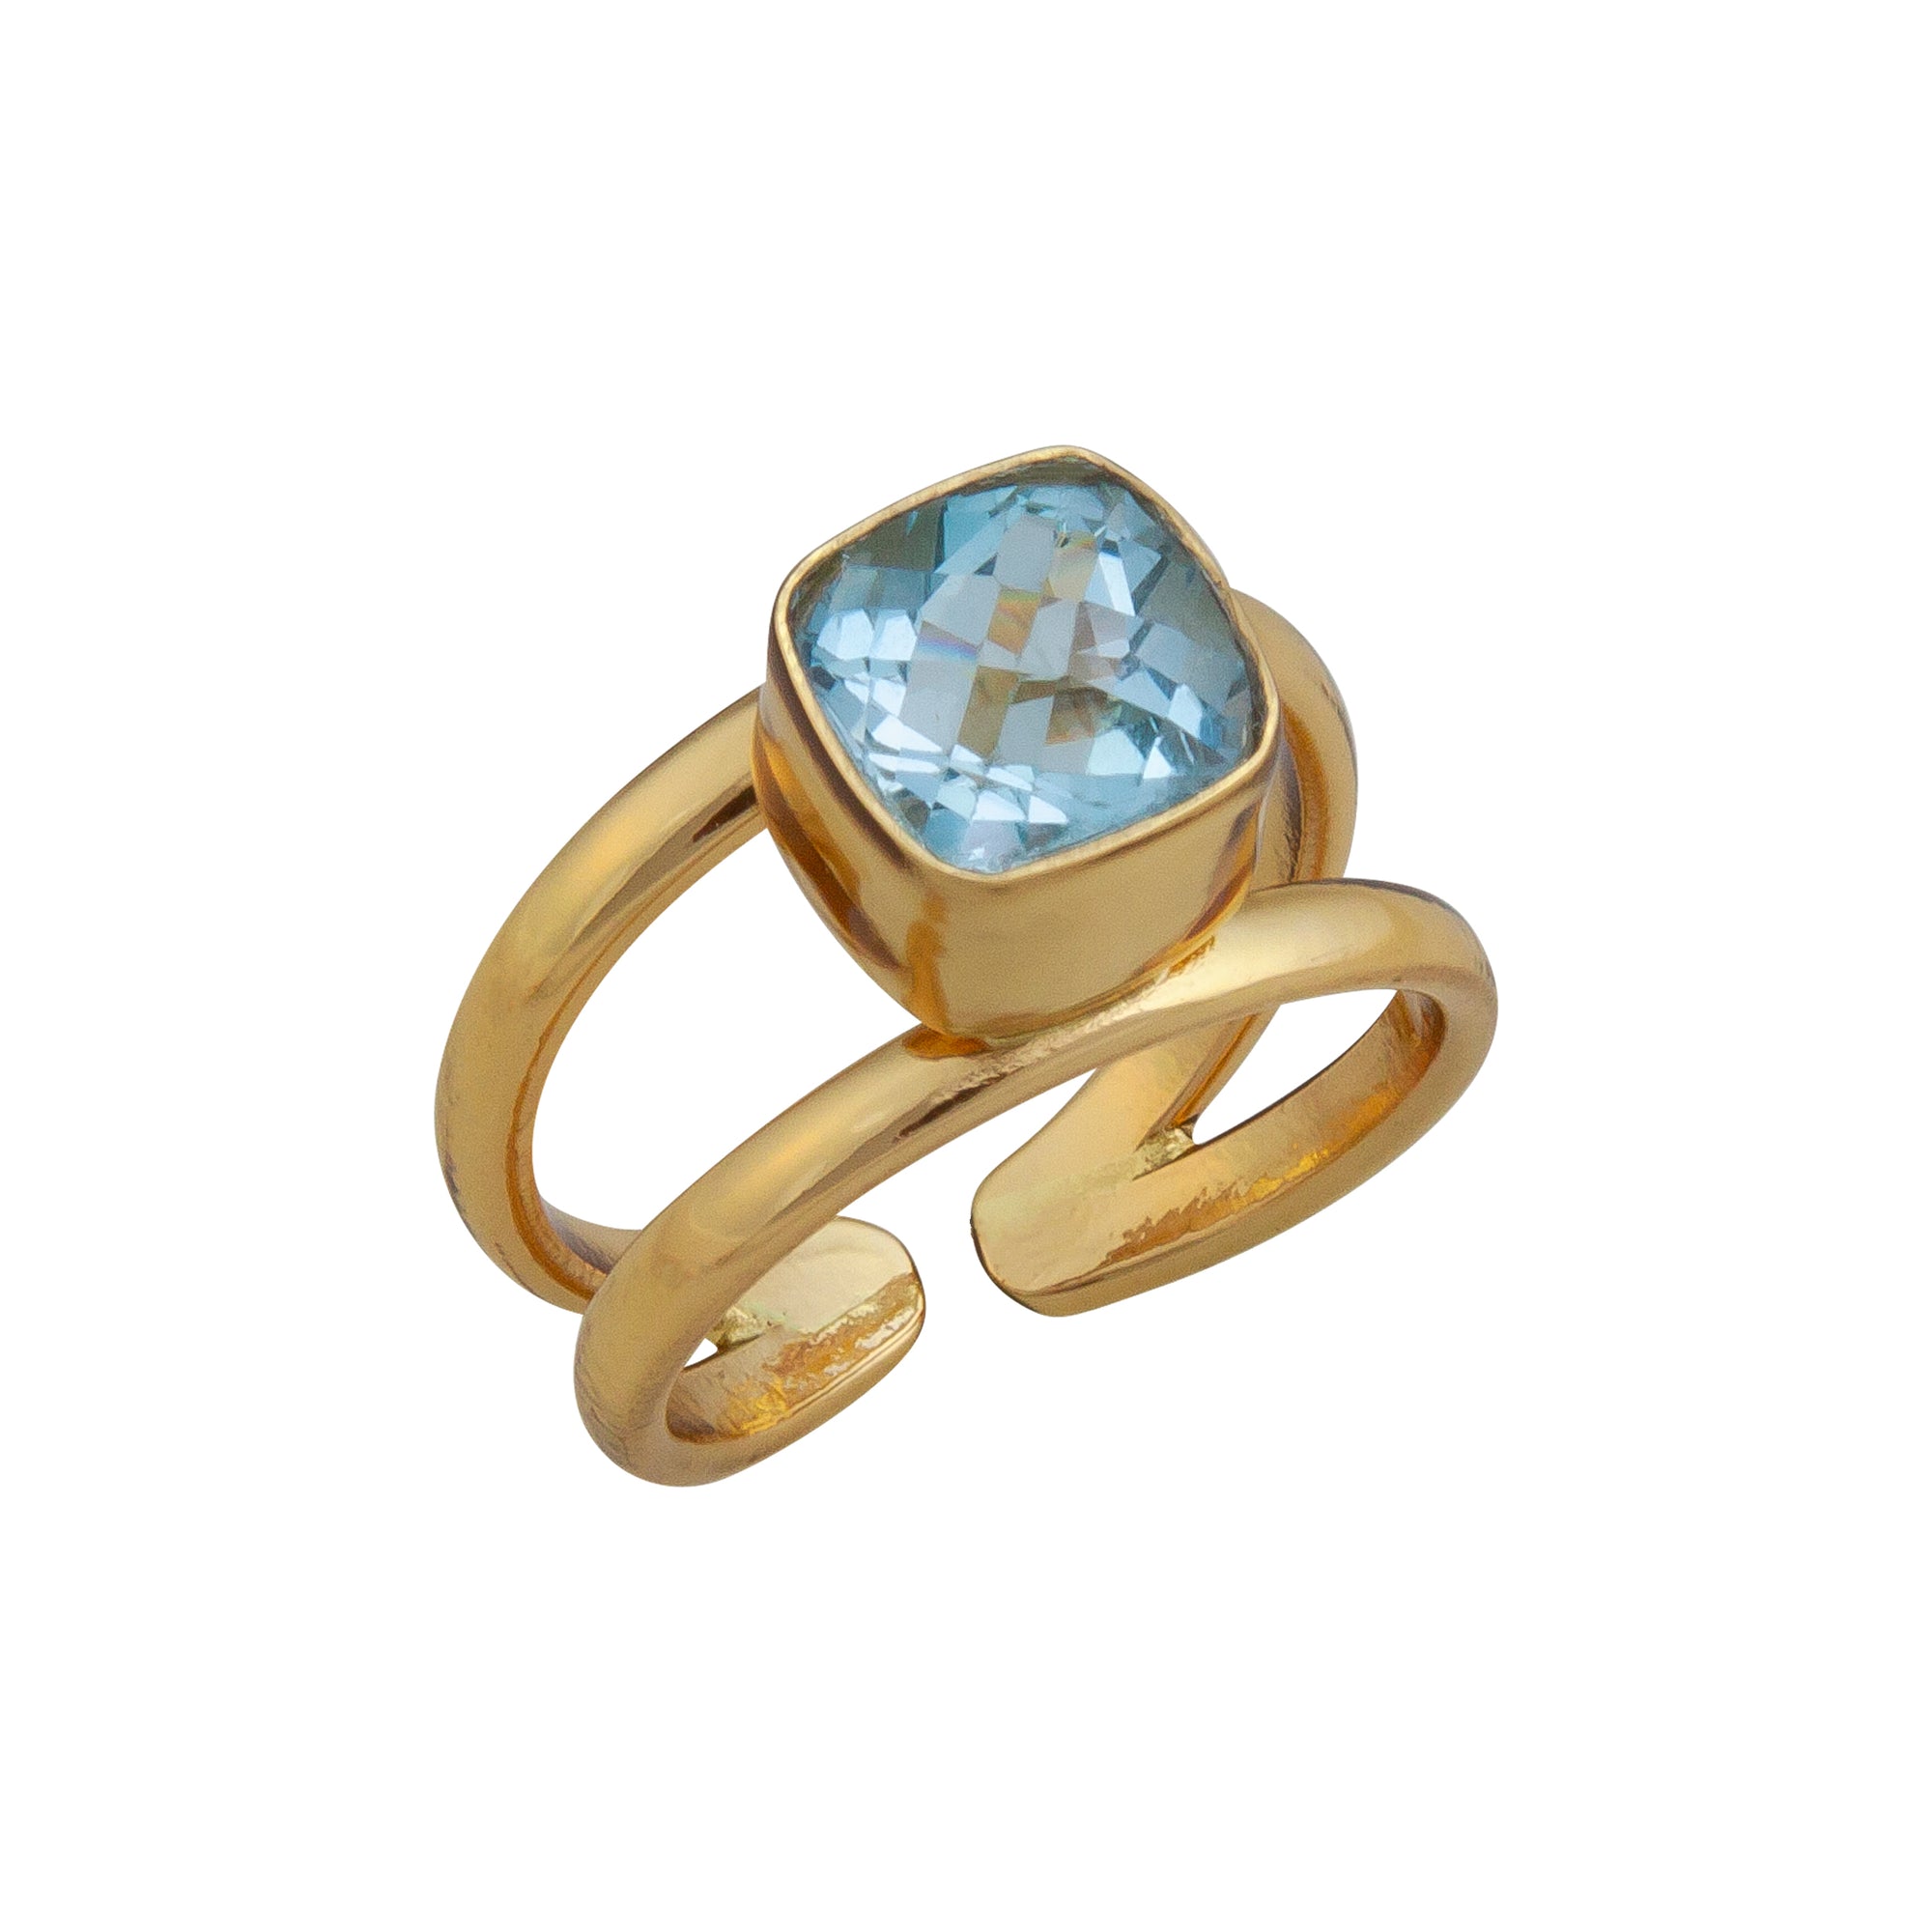 Alchemia Blue Topaz Double Band Adjustable Ring - Charles Albert Jewelry